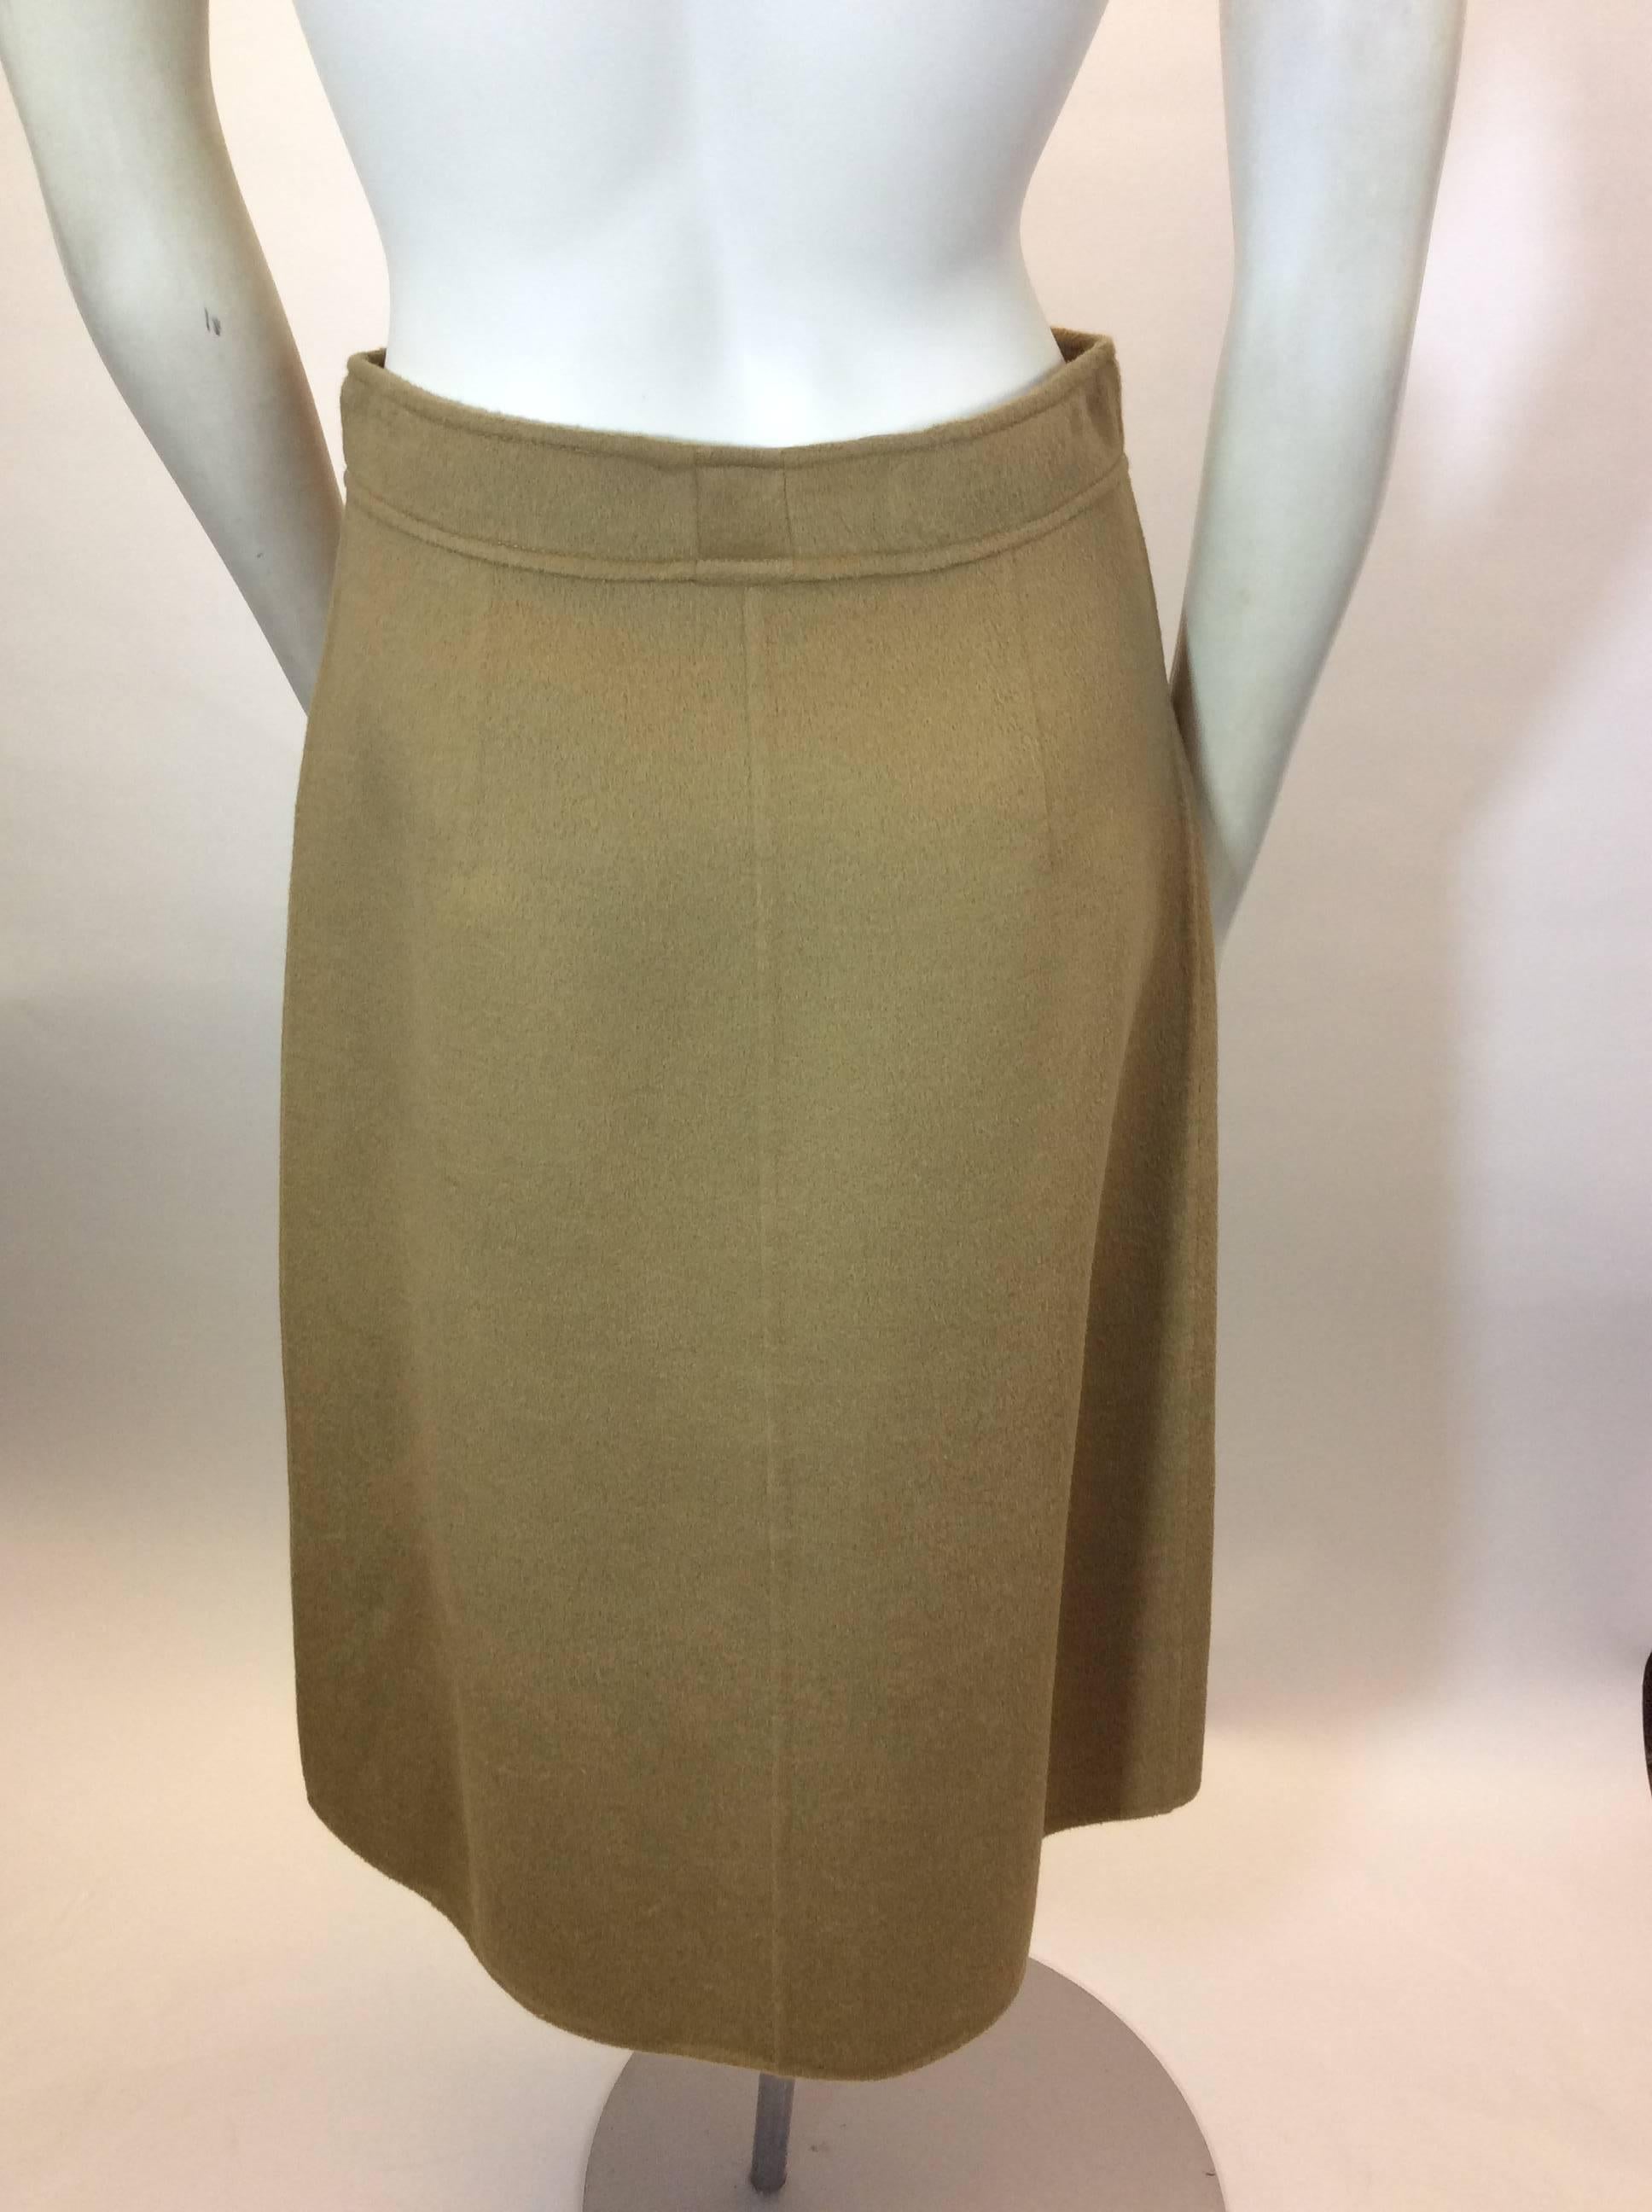 Bergdorf Goodman Button Down A-Line Skirt In Excellent Condition For Sale In Narberth, PA